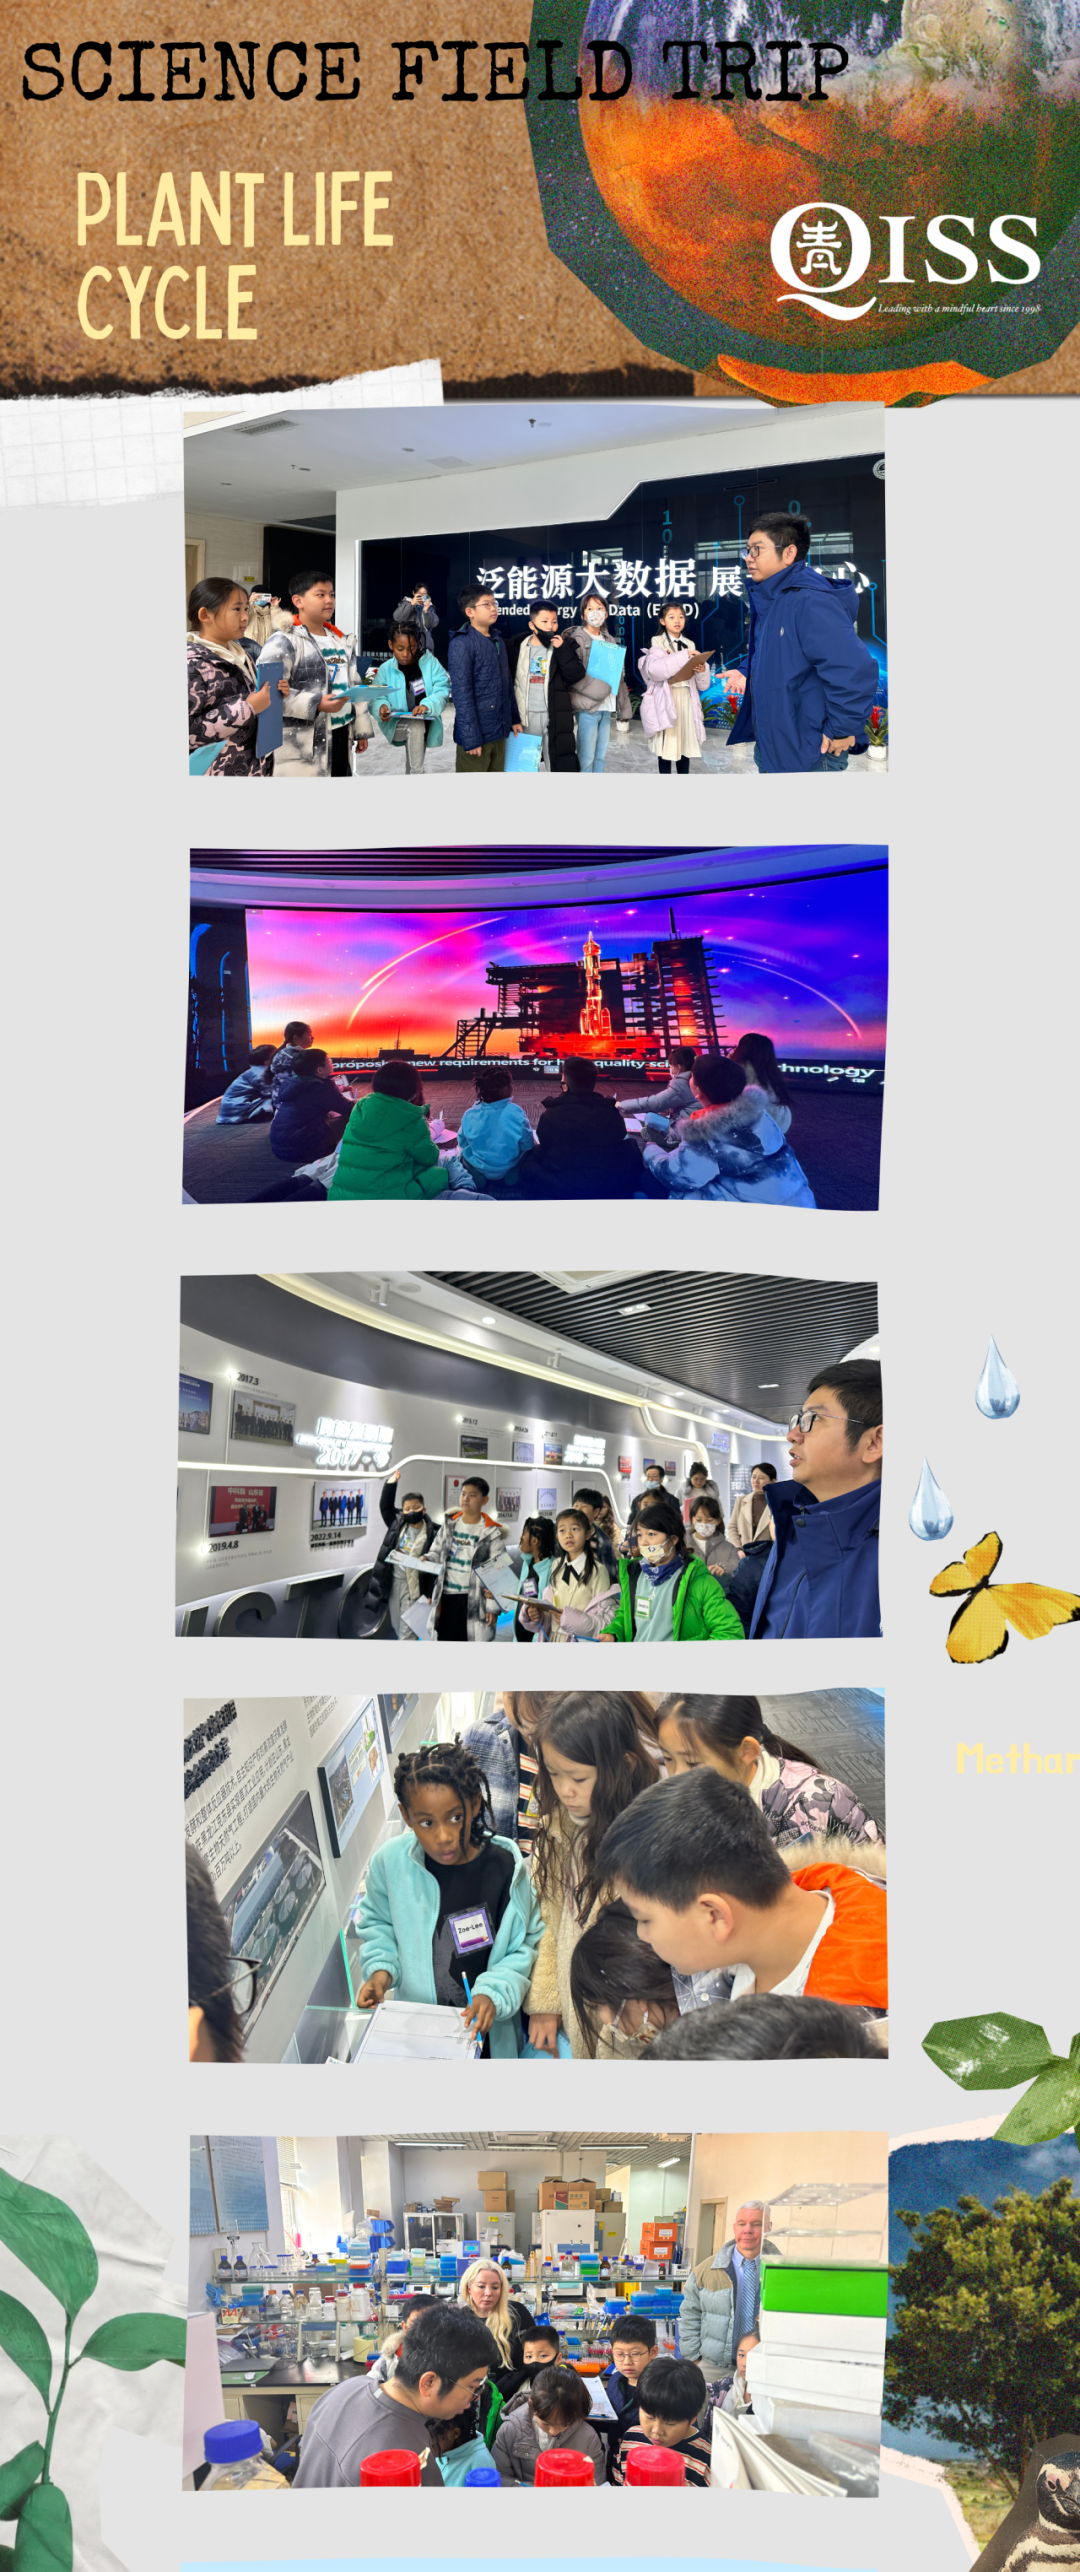 QISS Science Field Trip-Chinese Academy of Sciences｜QISS中国科学院之旅